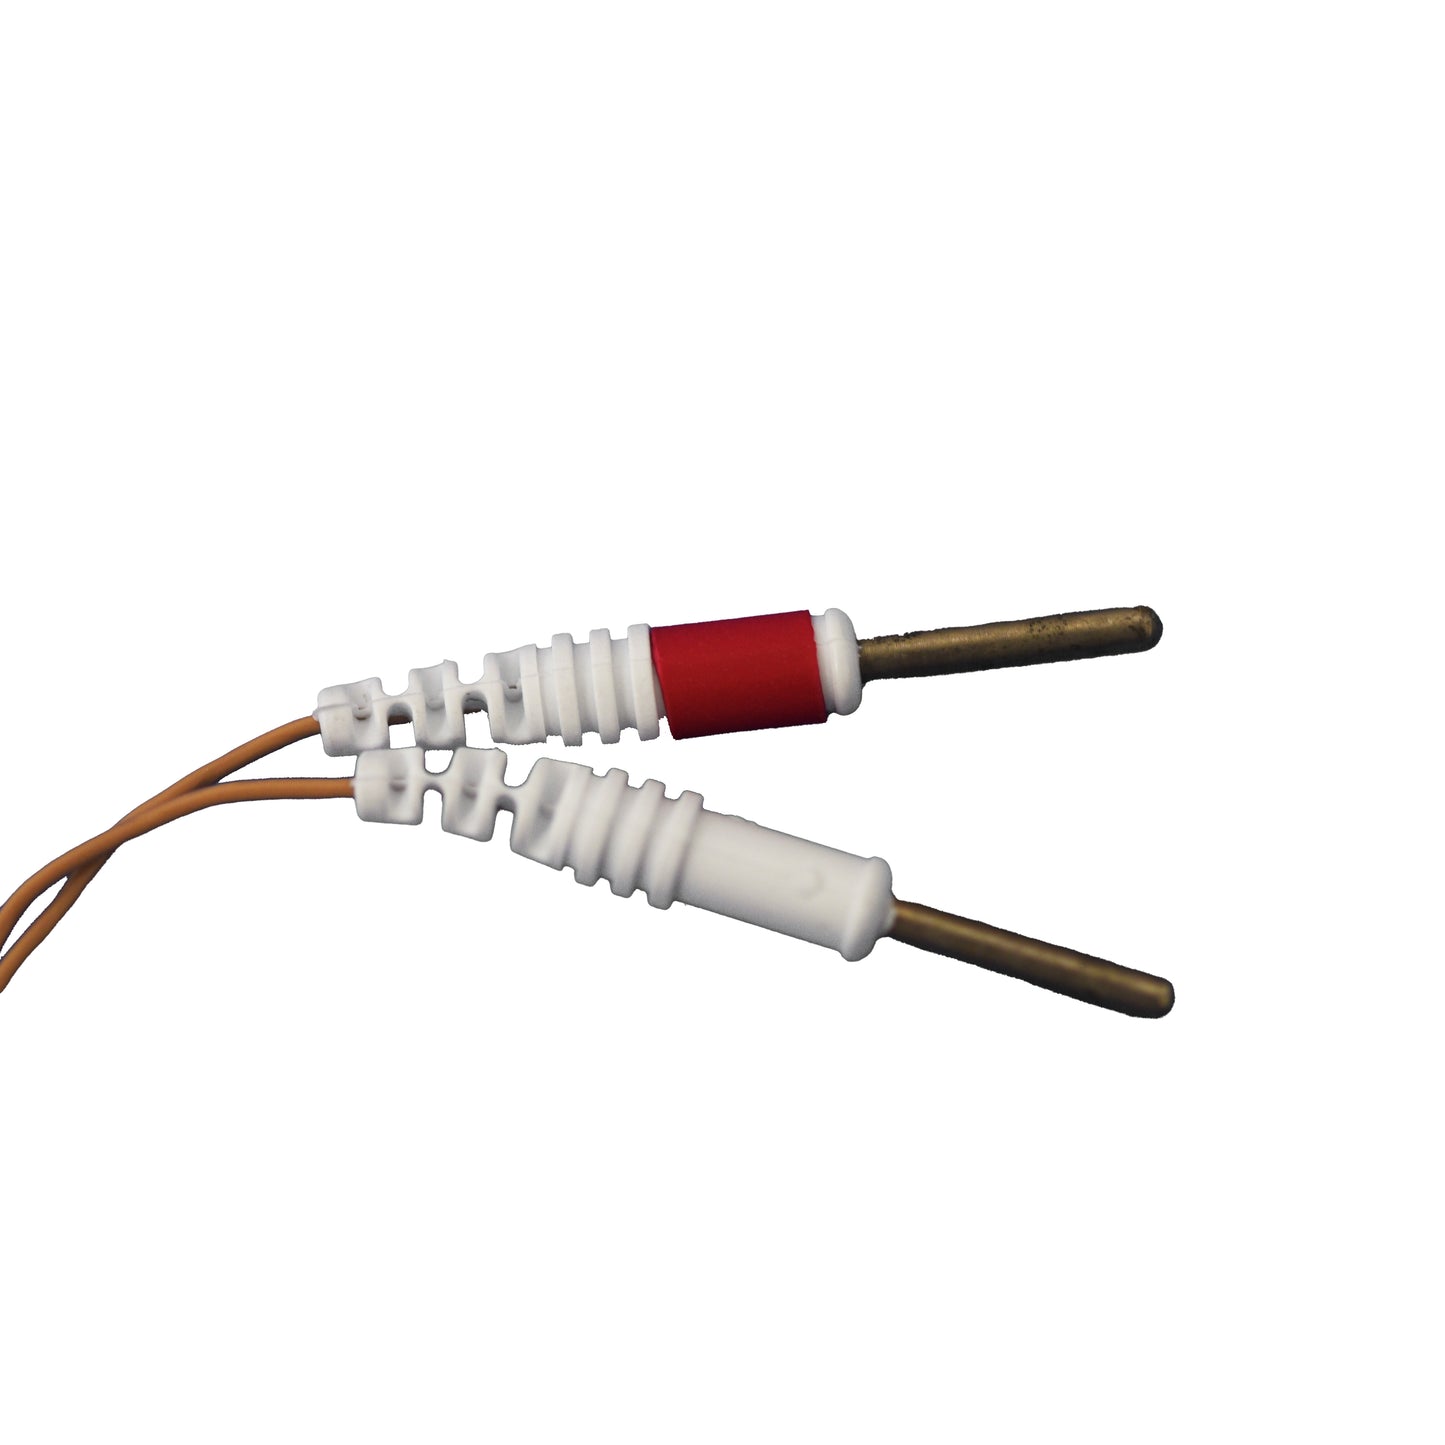 2 Channel Cable 305-340/2 With Spring